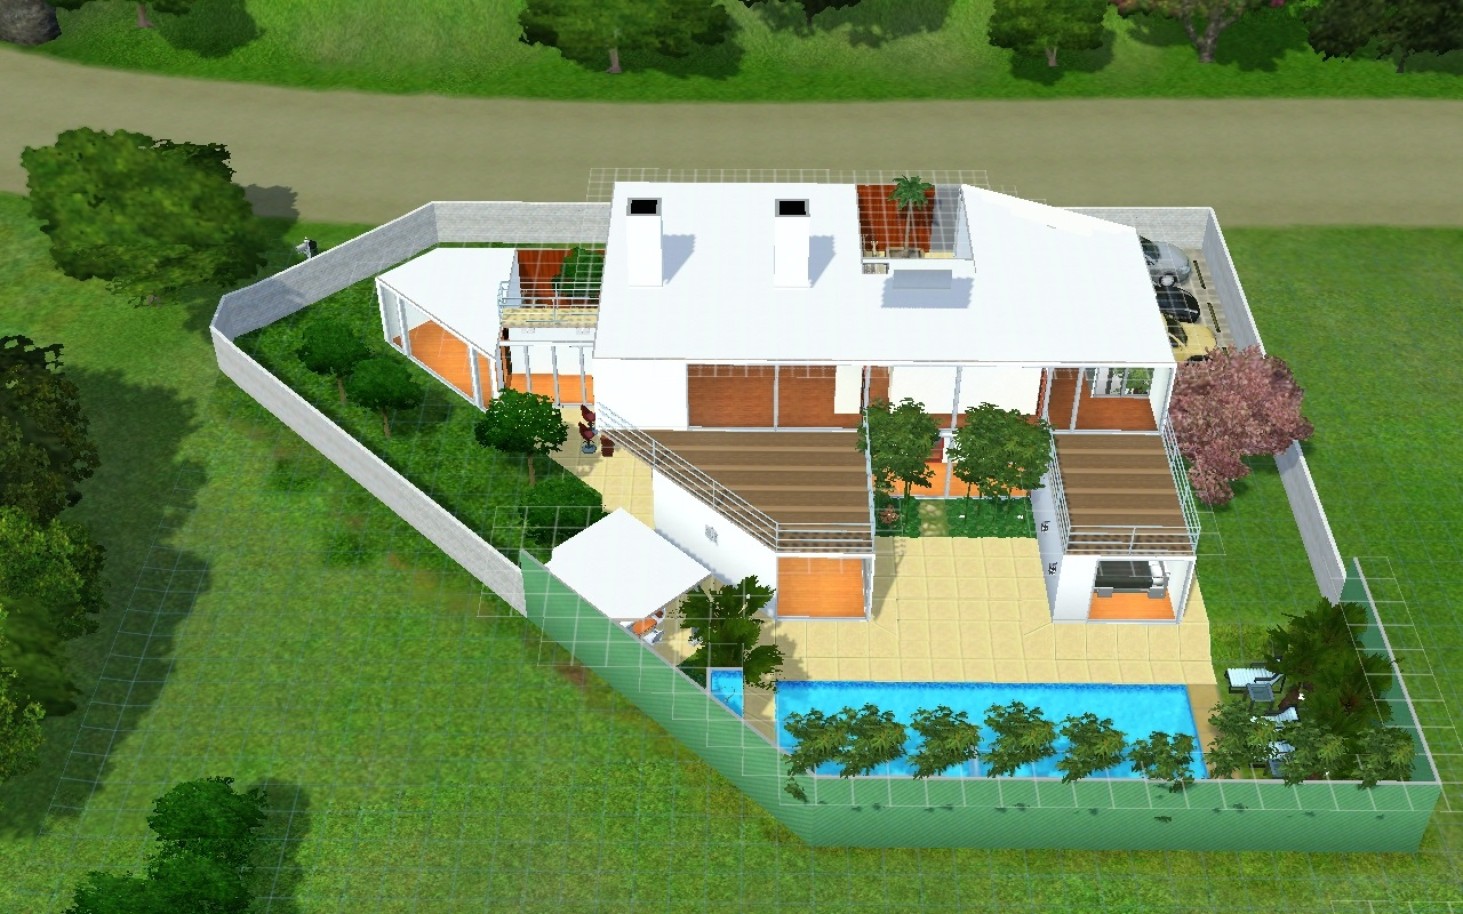 3 bedroom villa with pool and sea view, for sale in Guia, Algarve_244909